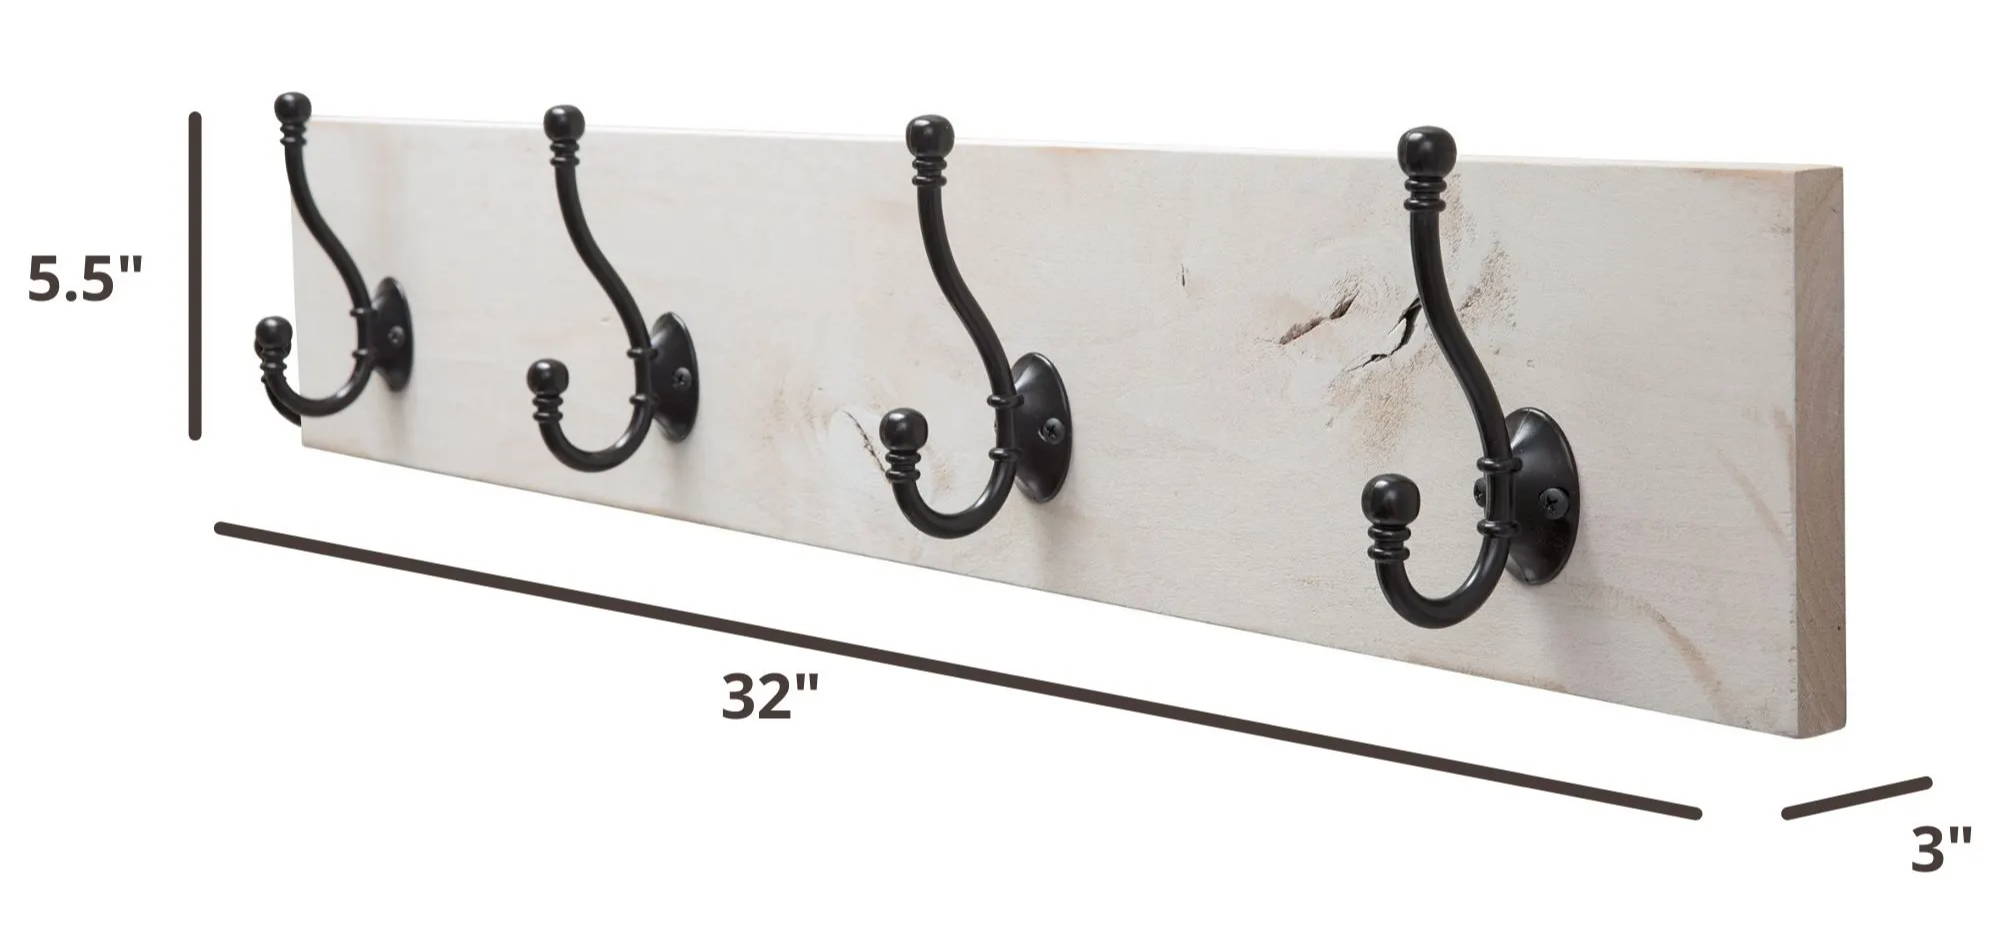 32 inches wide by 5.5 inches tall coat rack